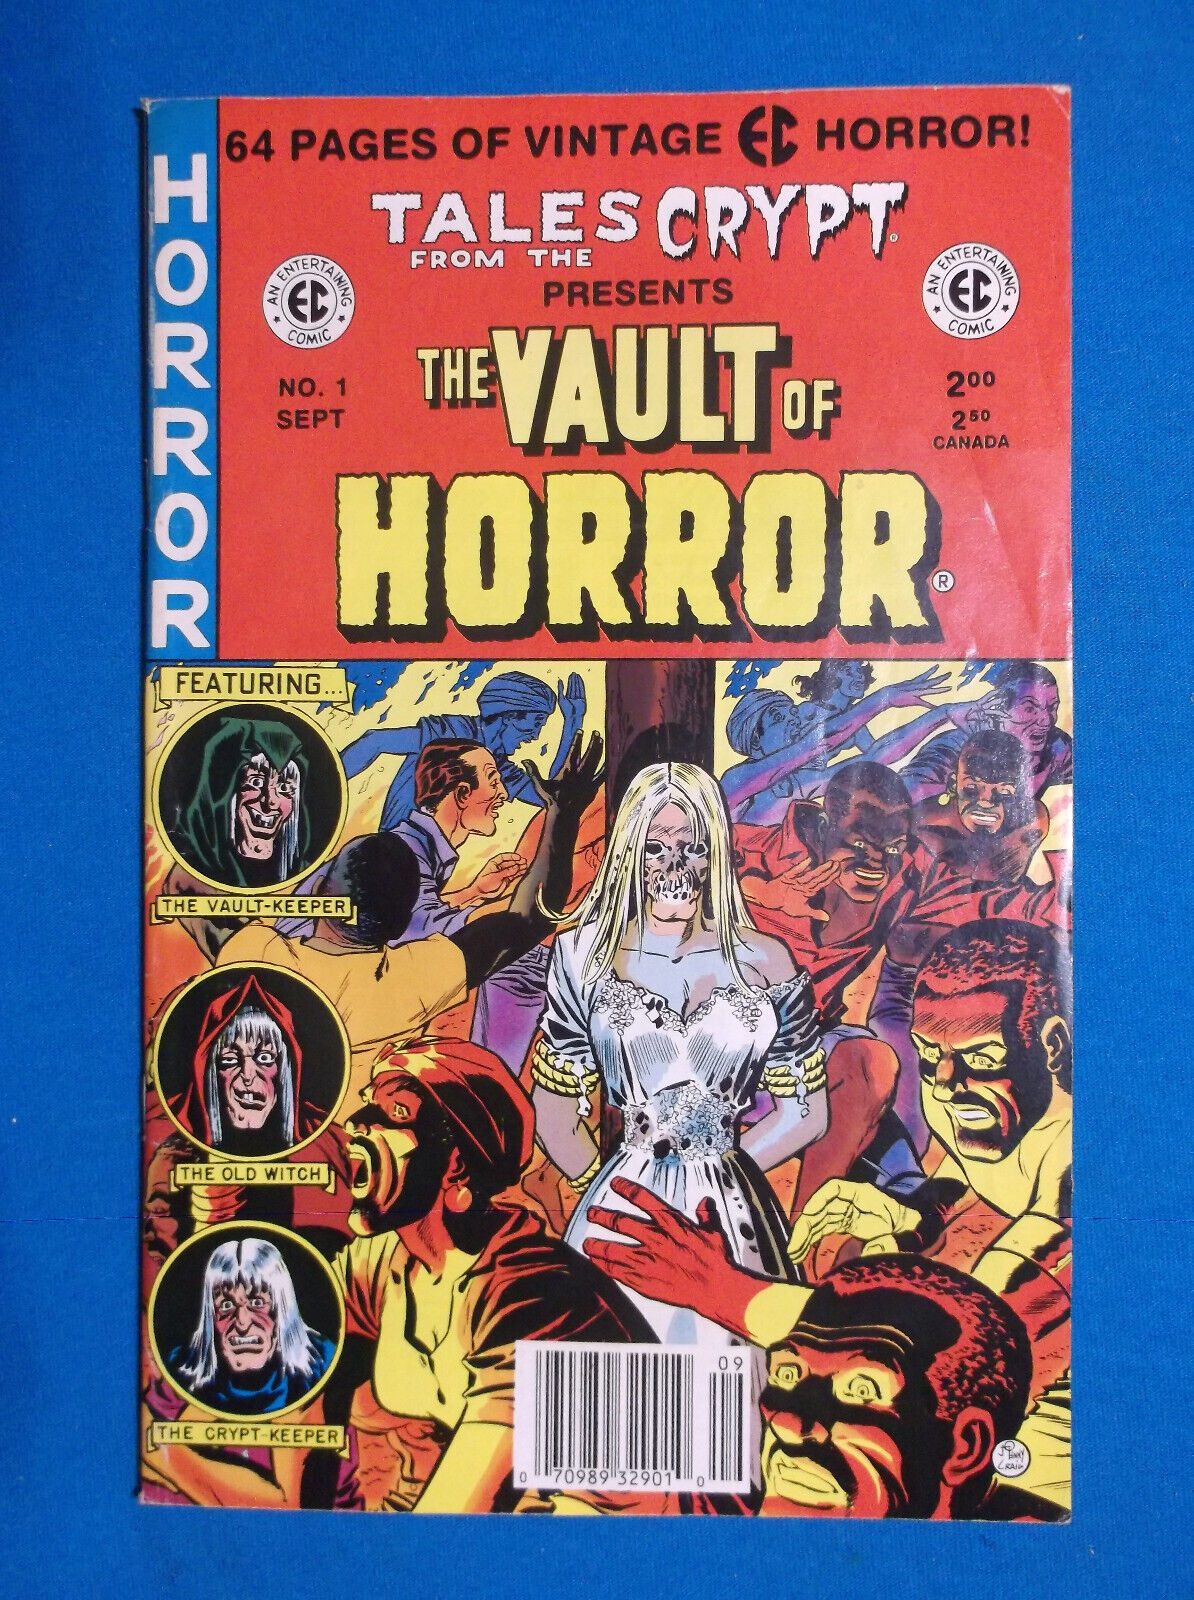 VAULT OF HORROR # 1 - VG/F 5.0 - CLASSIC EC REPRINTS - TALES FROM THE CRYPT 1991